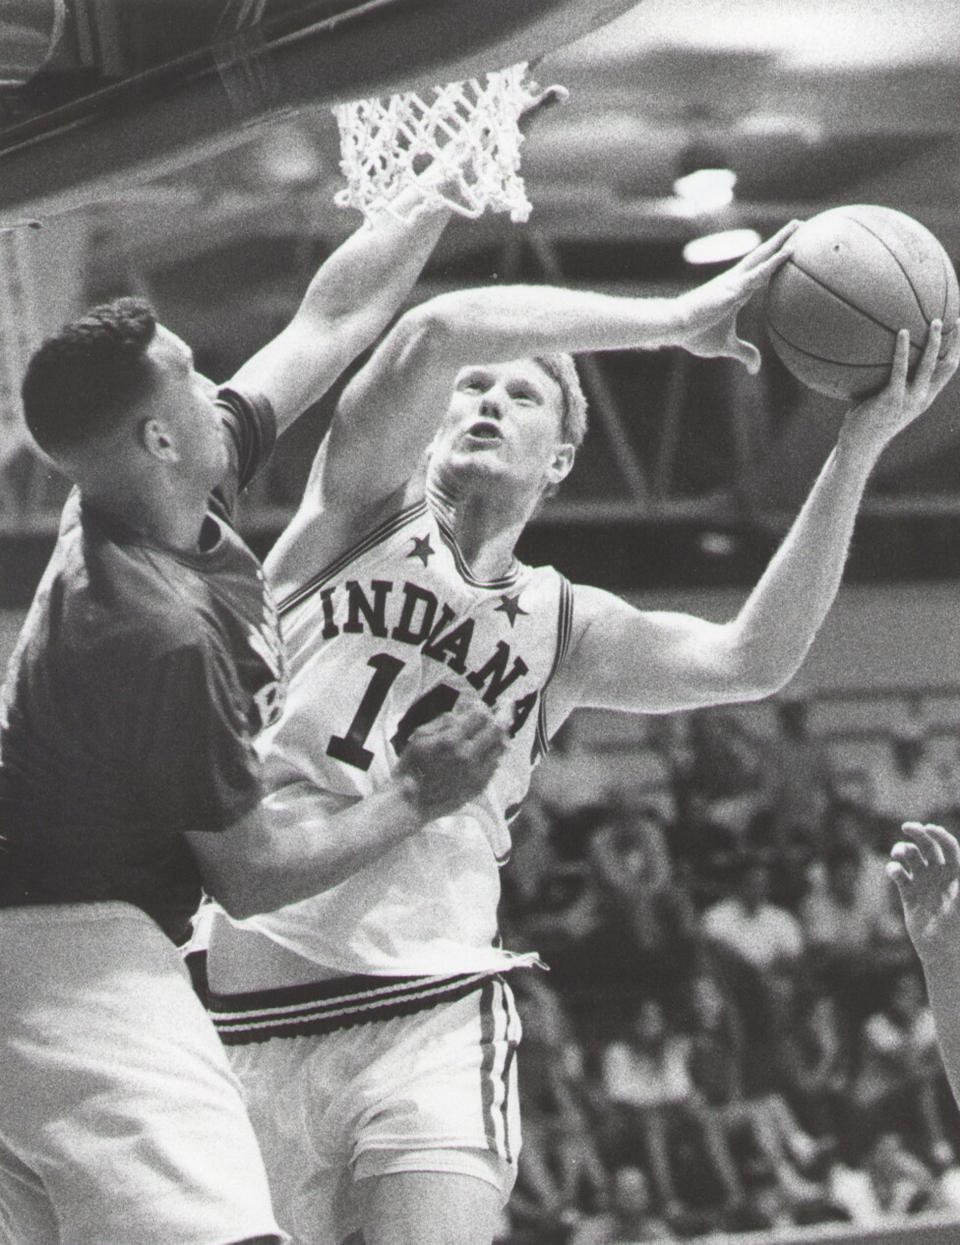 Indiana All-Star Chris Lawson shoots over ex-Notre Dame star Ken Barlow in an exhibition game pitting the Indiana All-Stars against former Indiana basketball stars.  1989